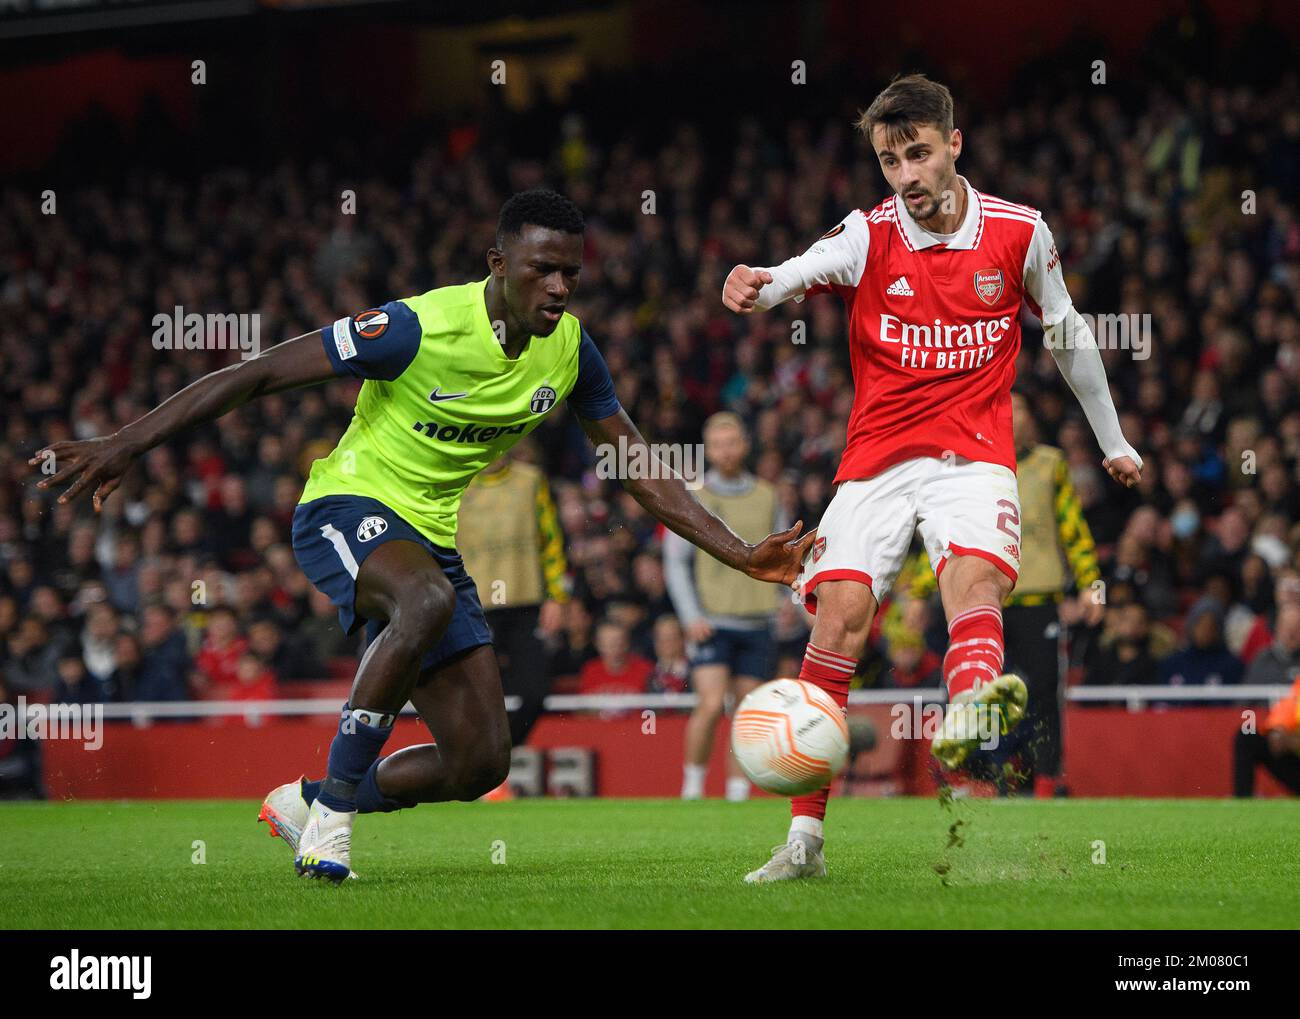 03 Nov 2022 - Arsenal v FC Zurich - UEFA Europa League - Group A - Emirates Stadium   Arsenal's Fabio Vieira during the match against FC Zurich Picture : Mark Pain / Alamy Stock Photo